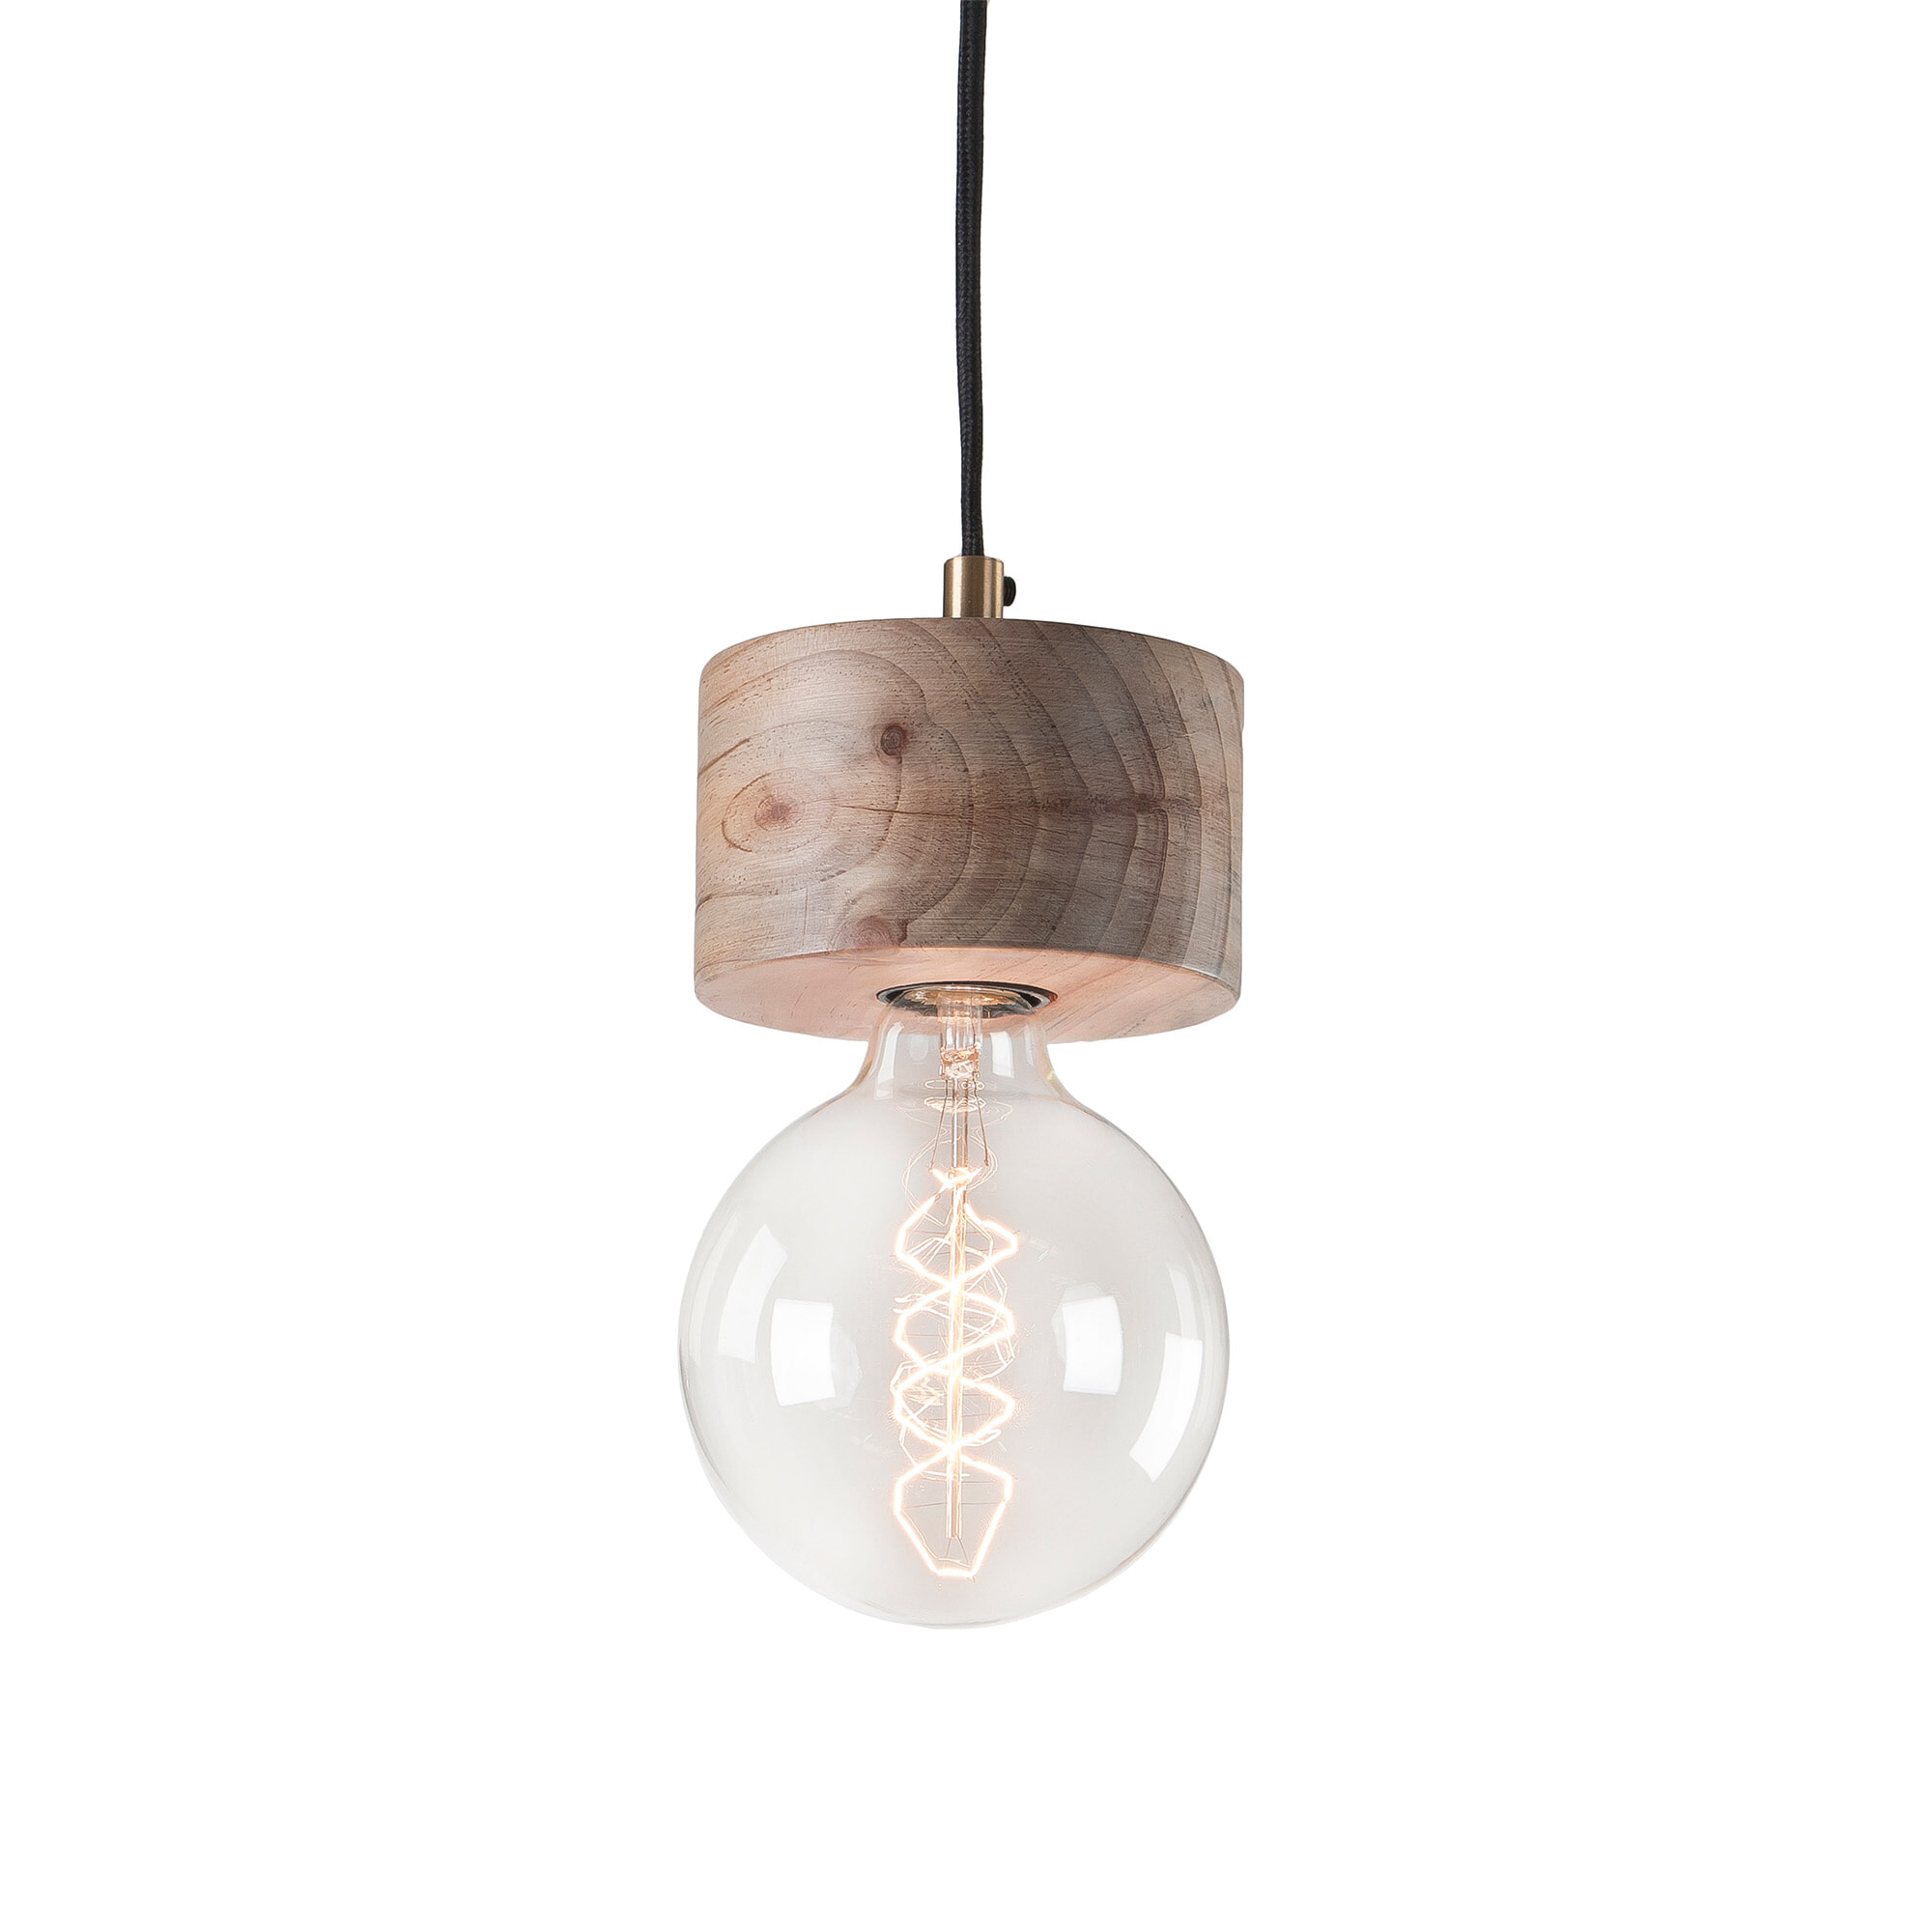 Kave Home hanglamp 'Allie' hout